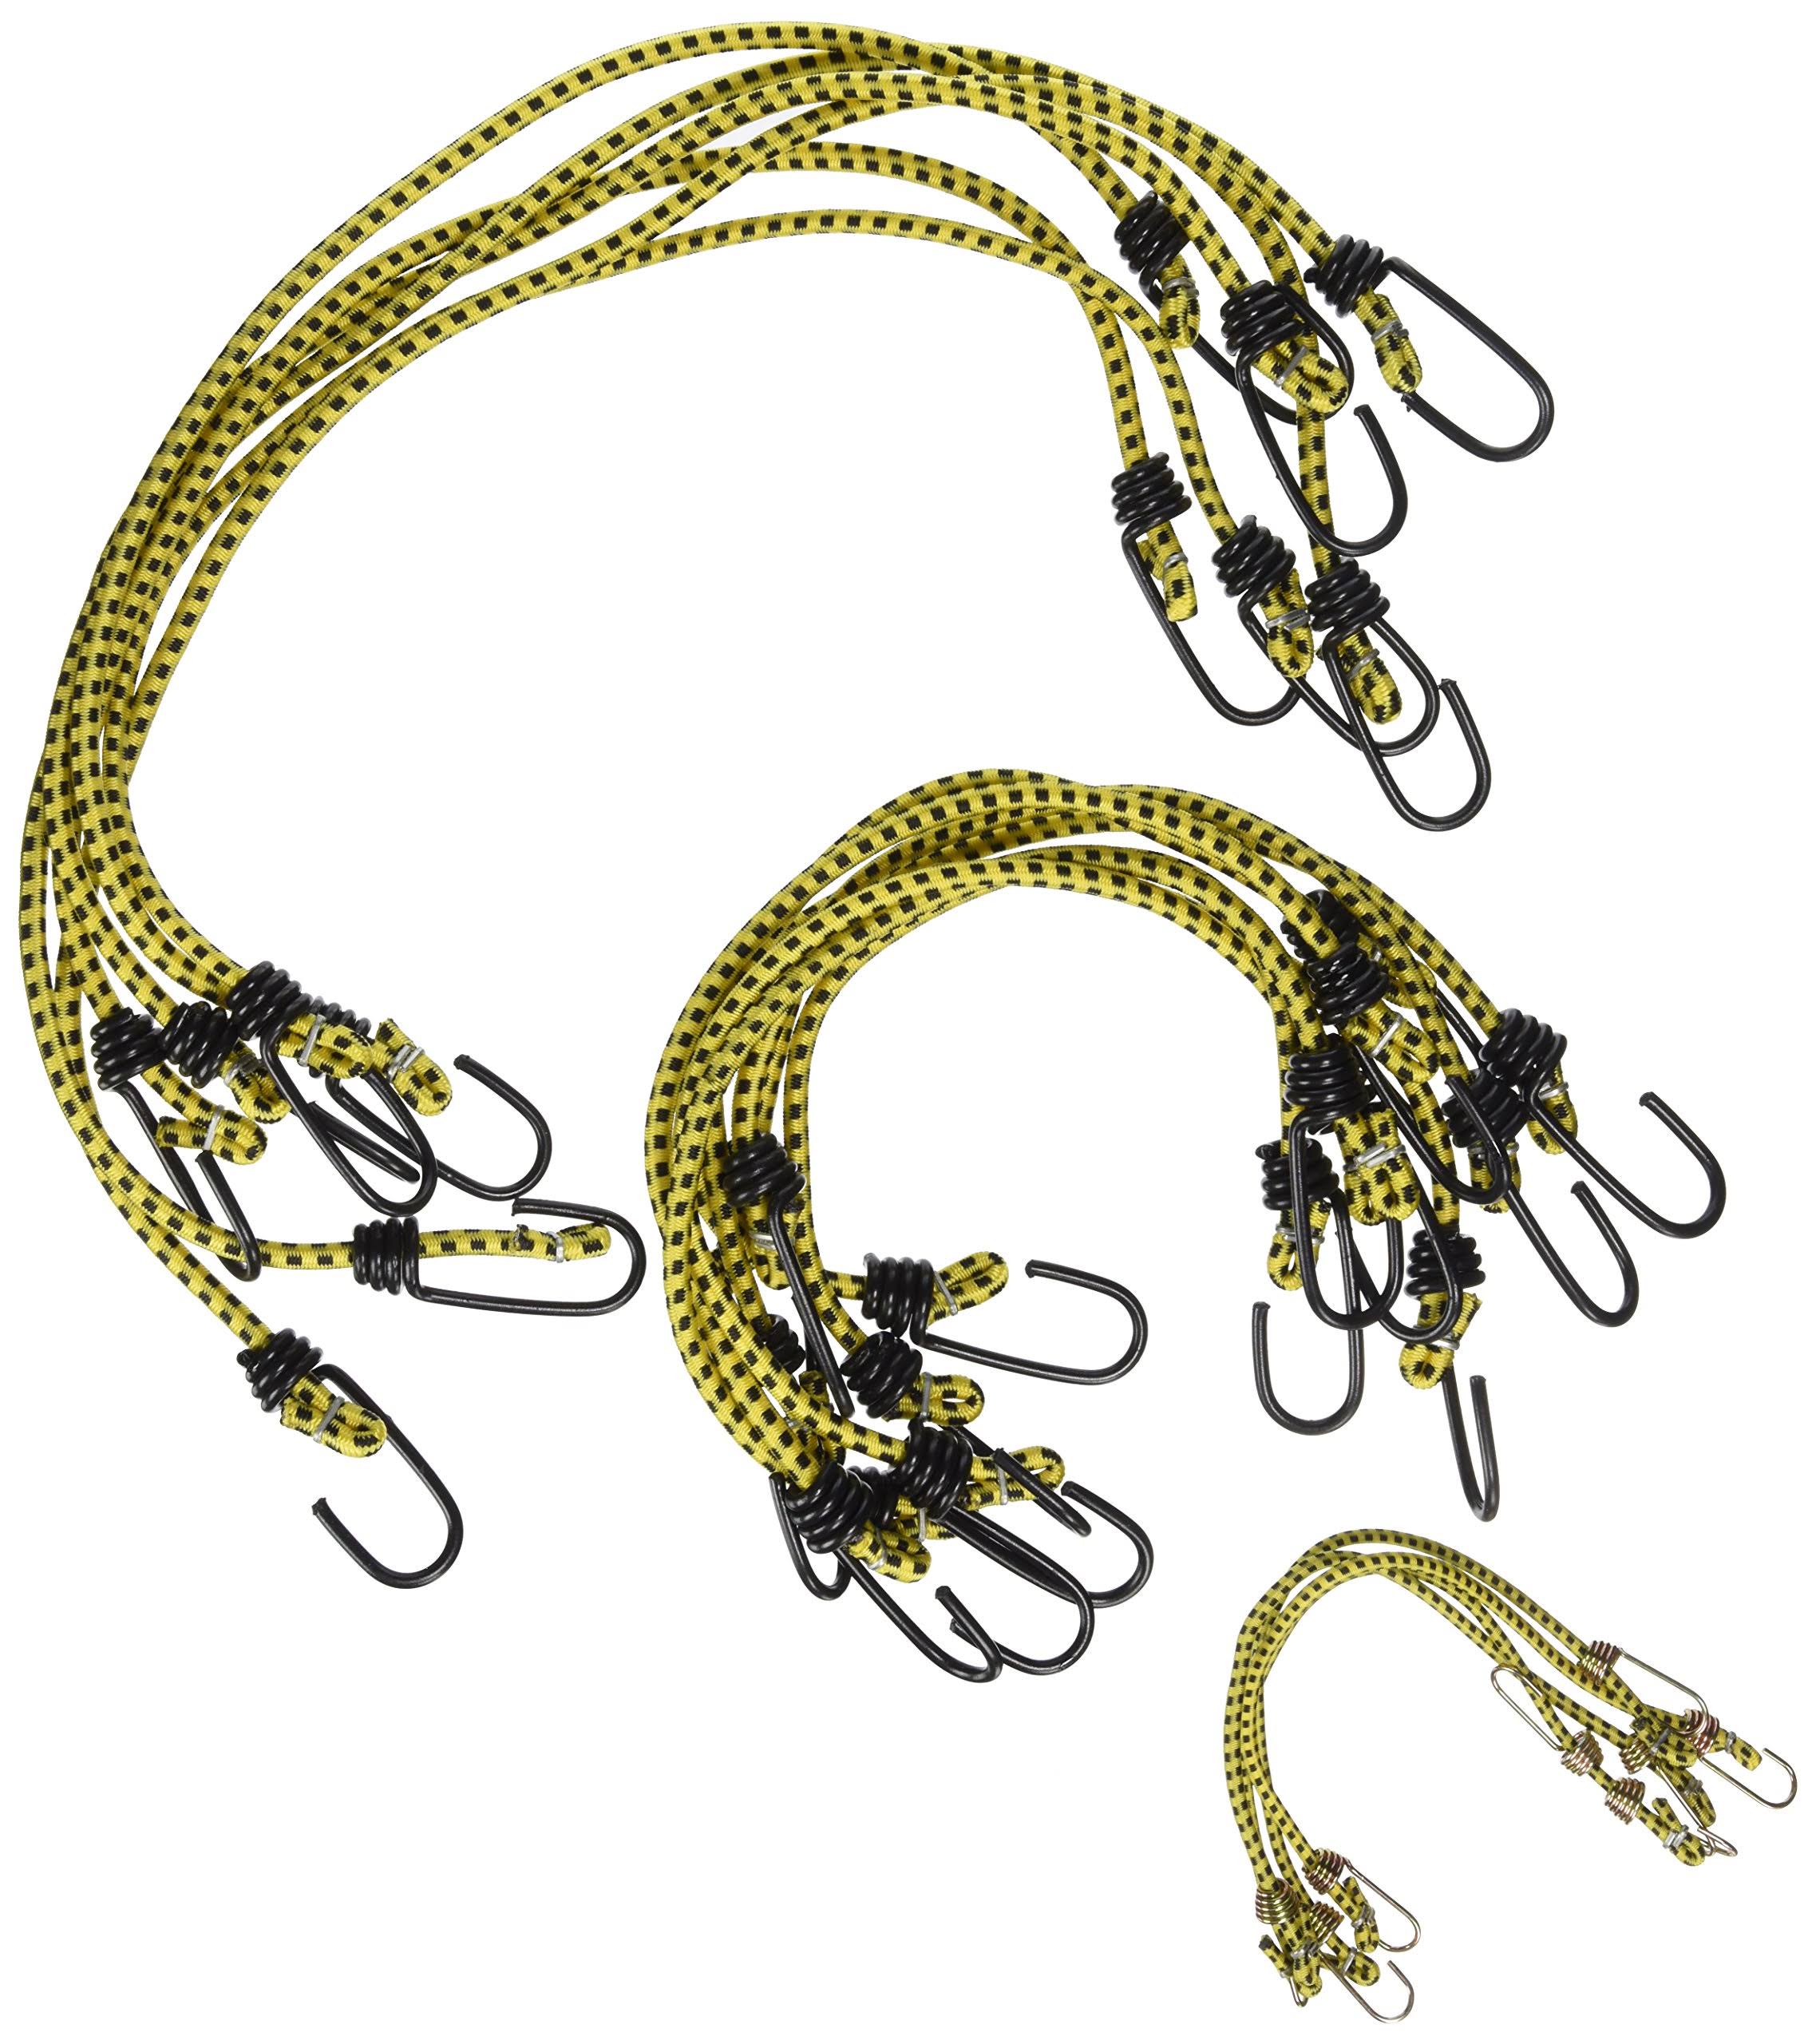 Keeper Bungee Cord - Assorted Sizes, 18 Pack